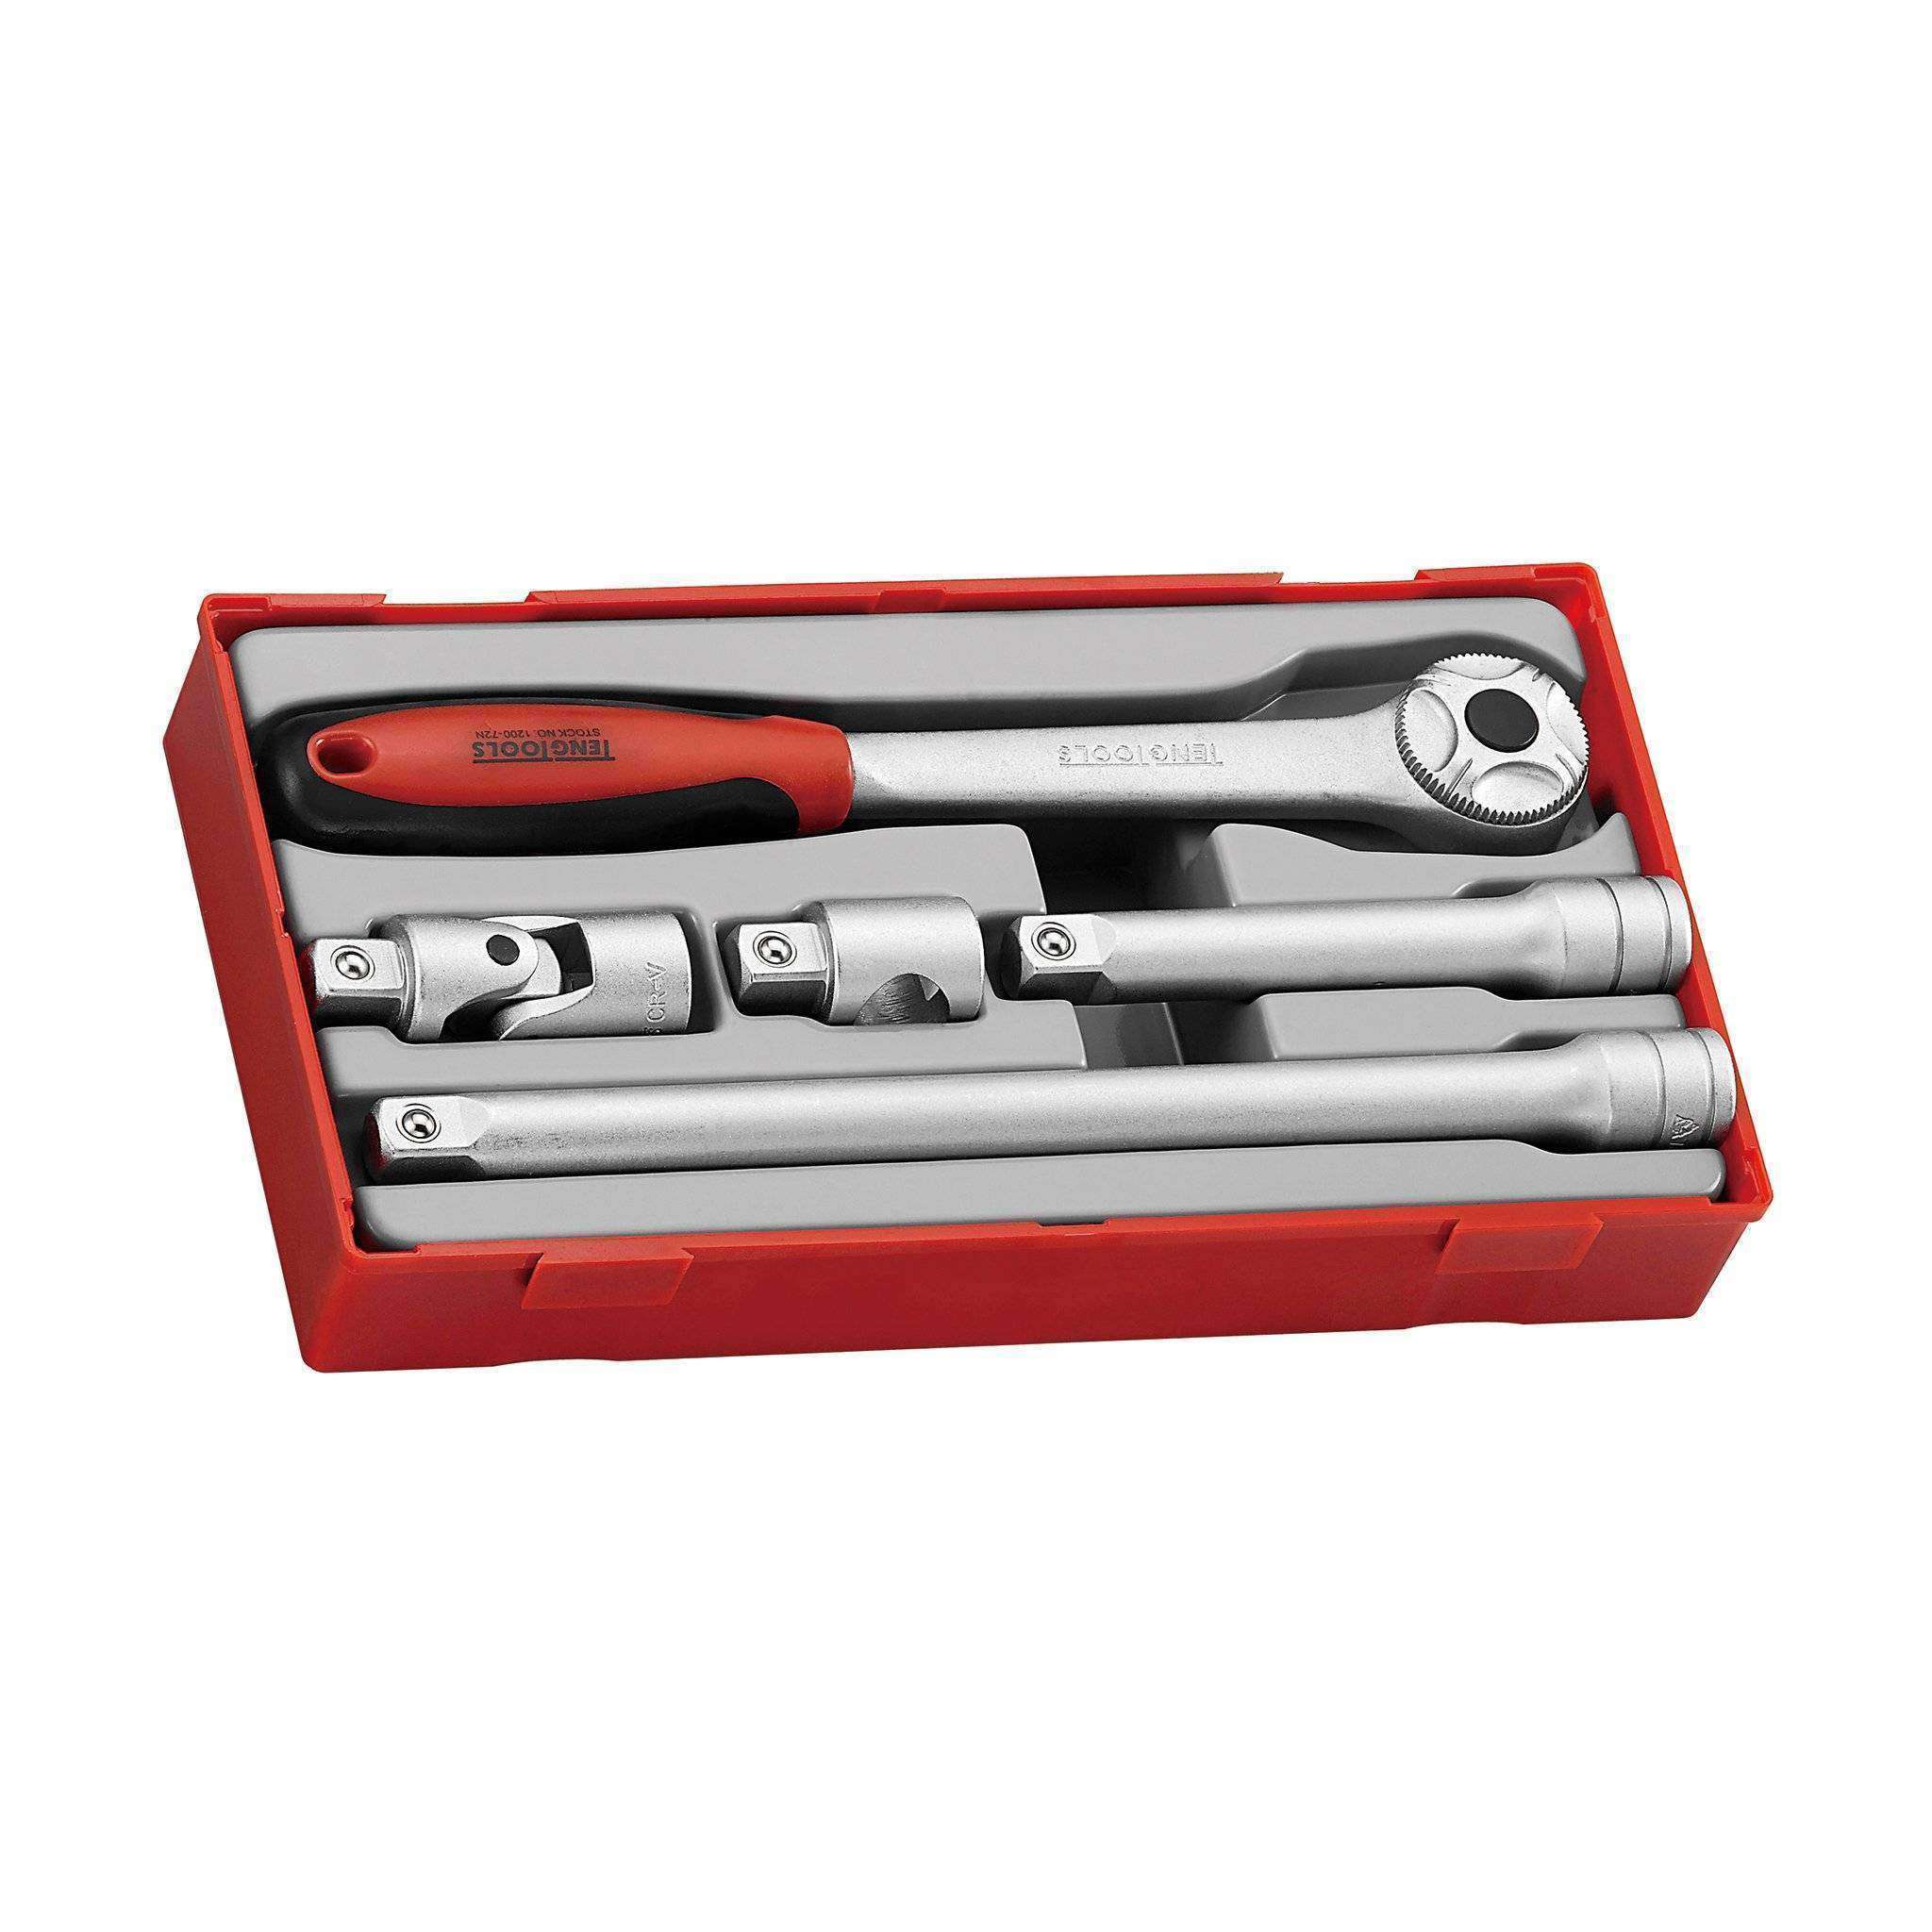 Teng Tools 5 Piece 1/2 Drive Ratchet & Accessories Set Tool Tray With 72 Teeth Ratchet - TT1205